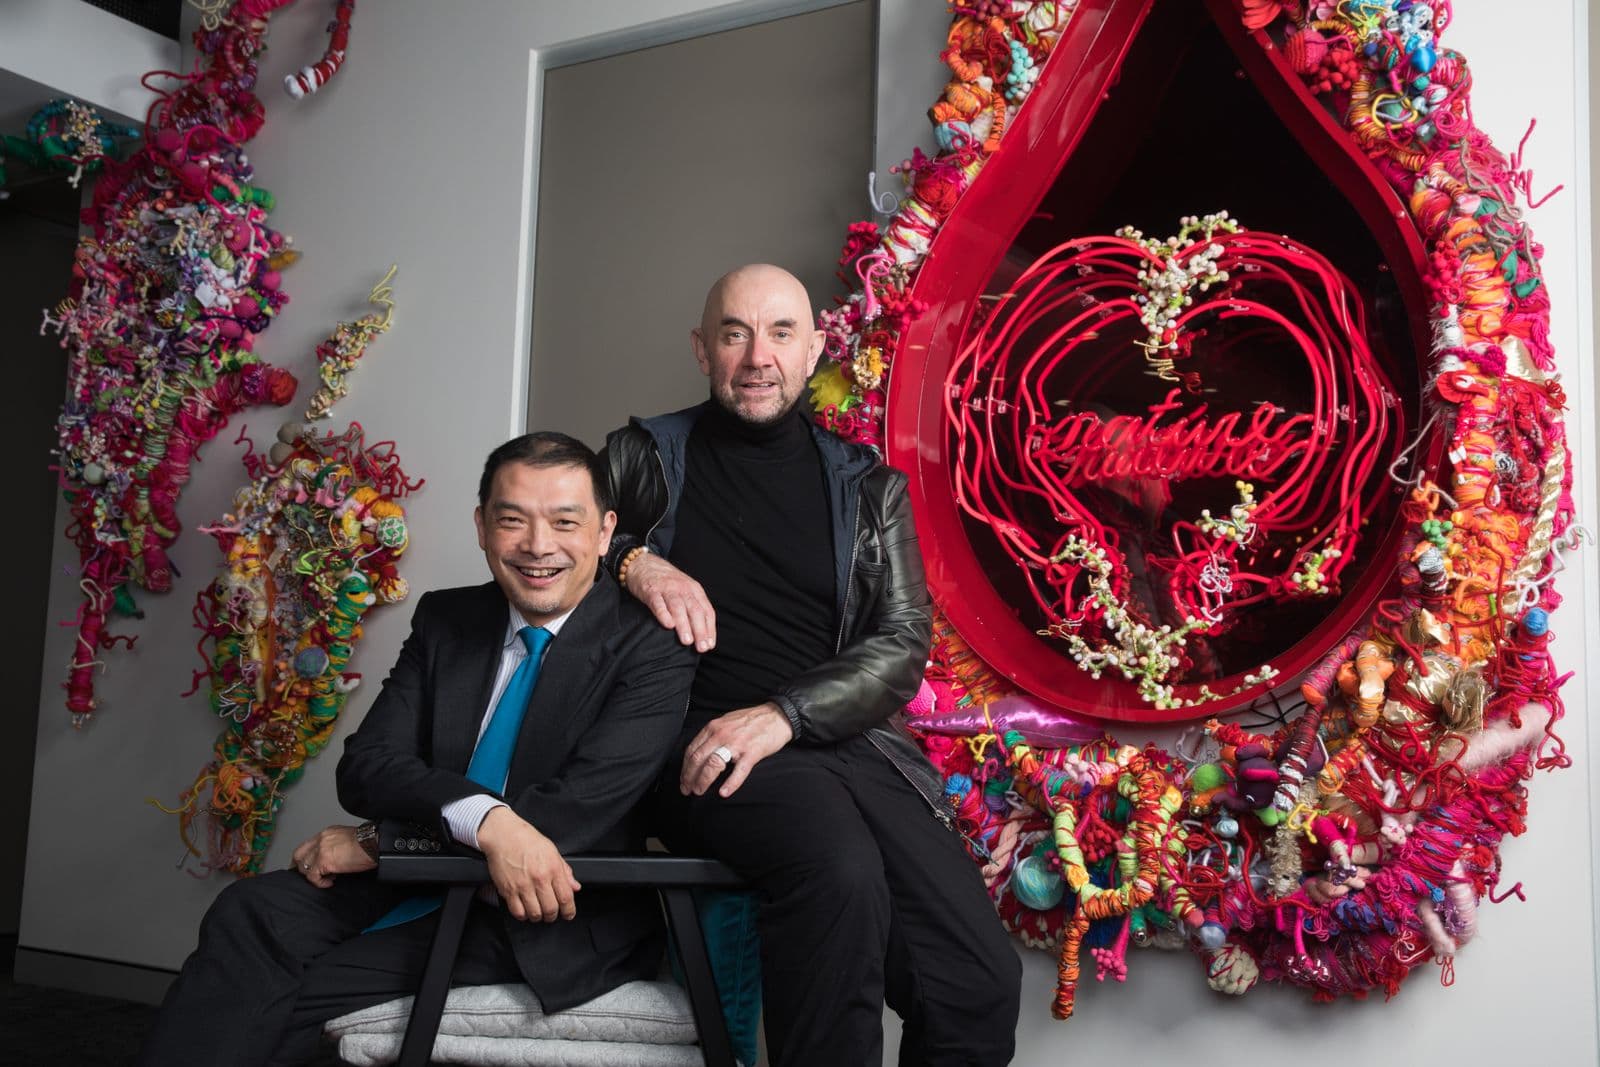 Two men sit together in front of an artwork